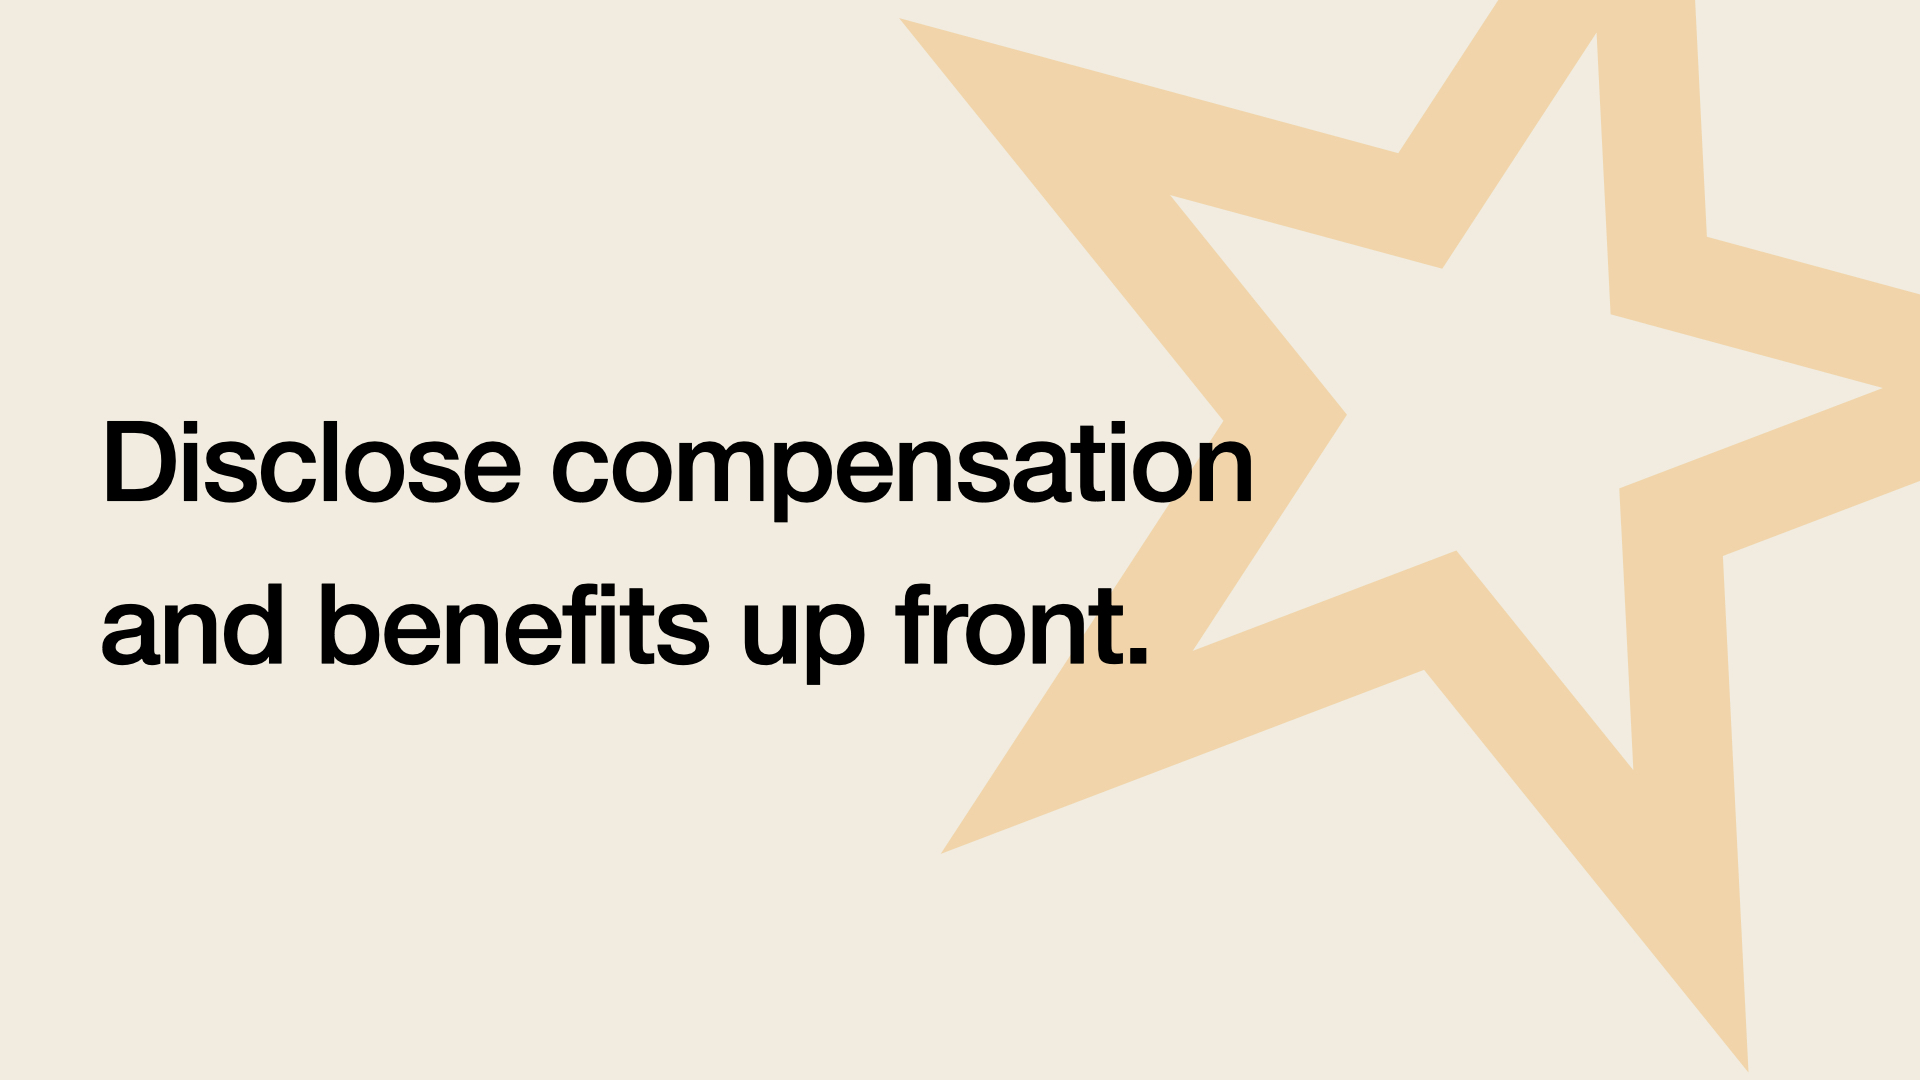 Disclose compensation and benefits up front